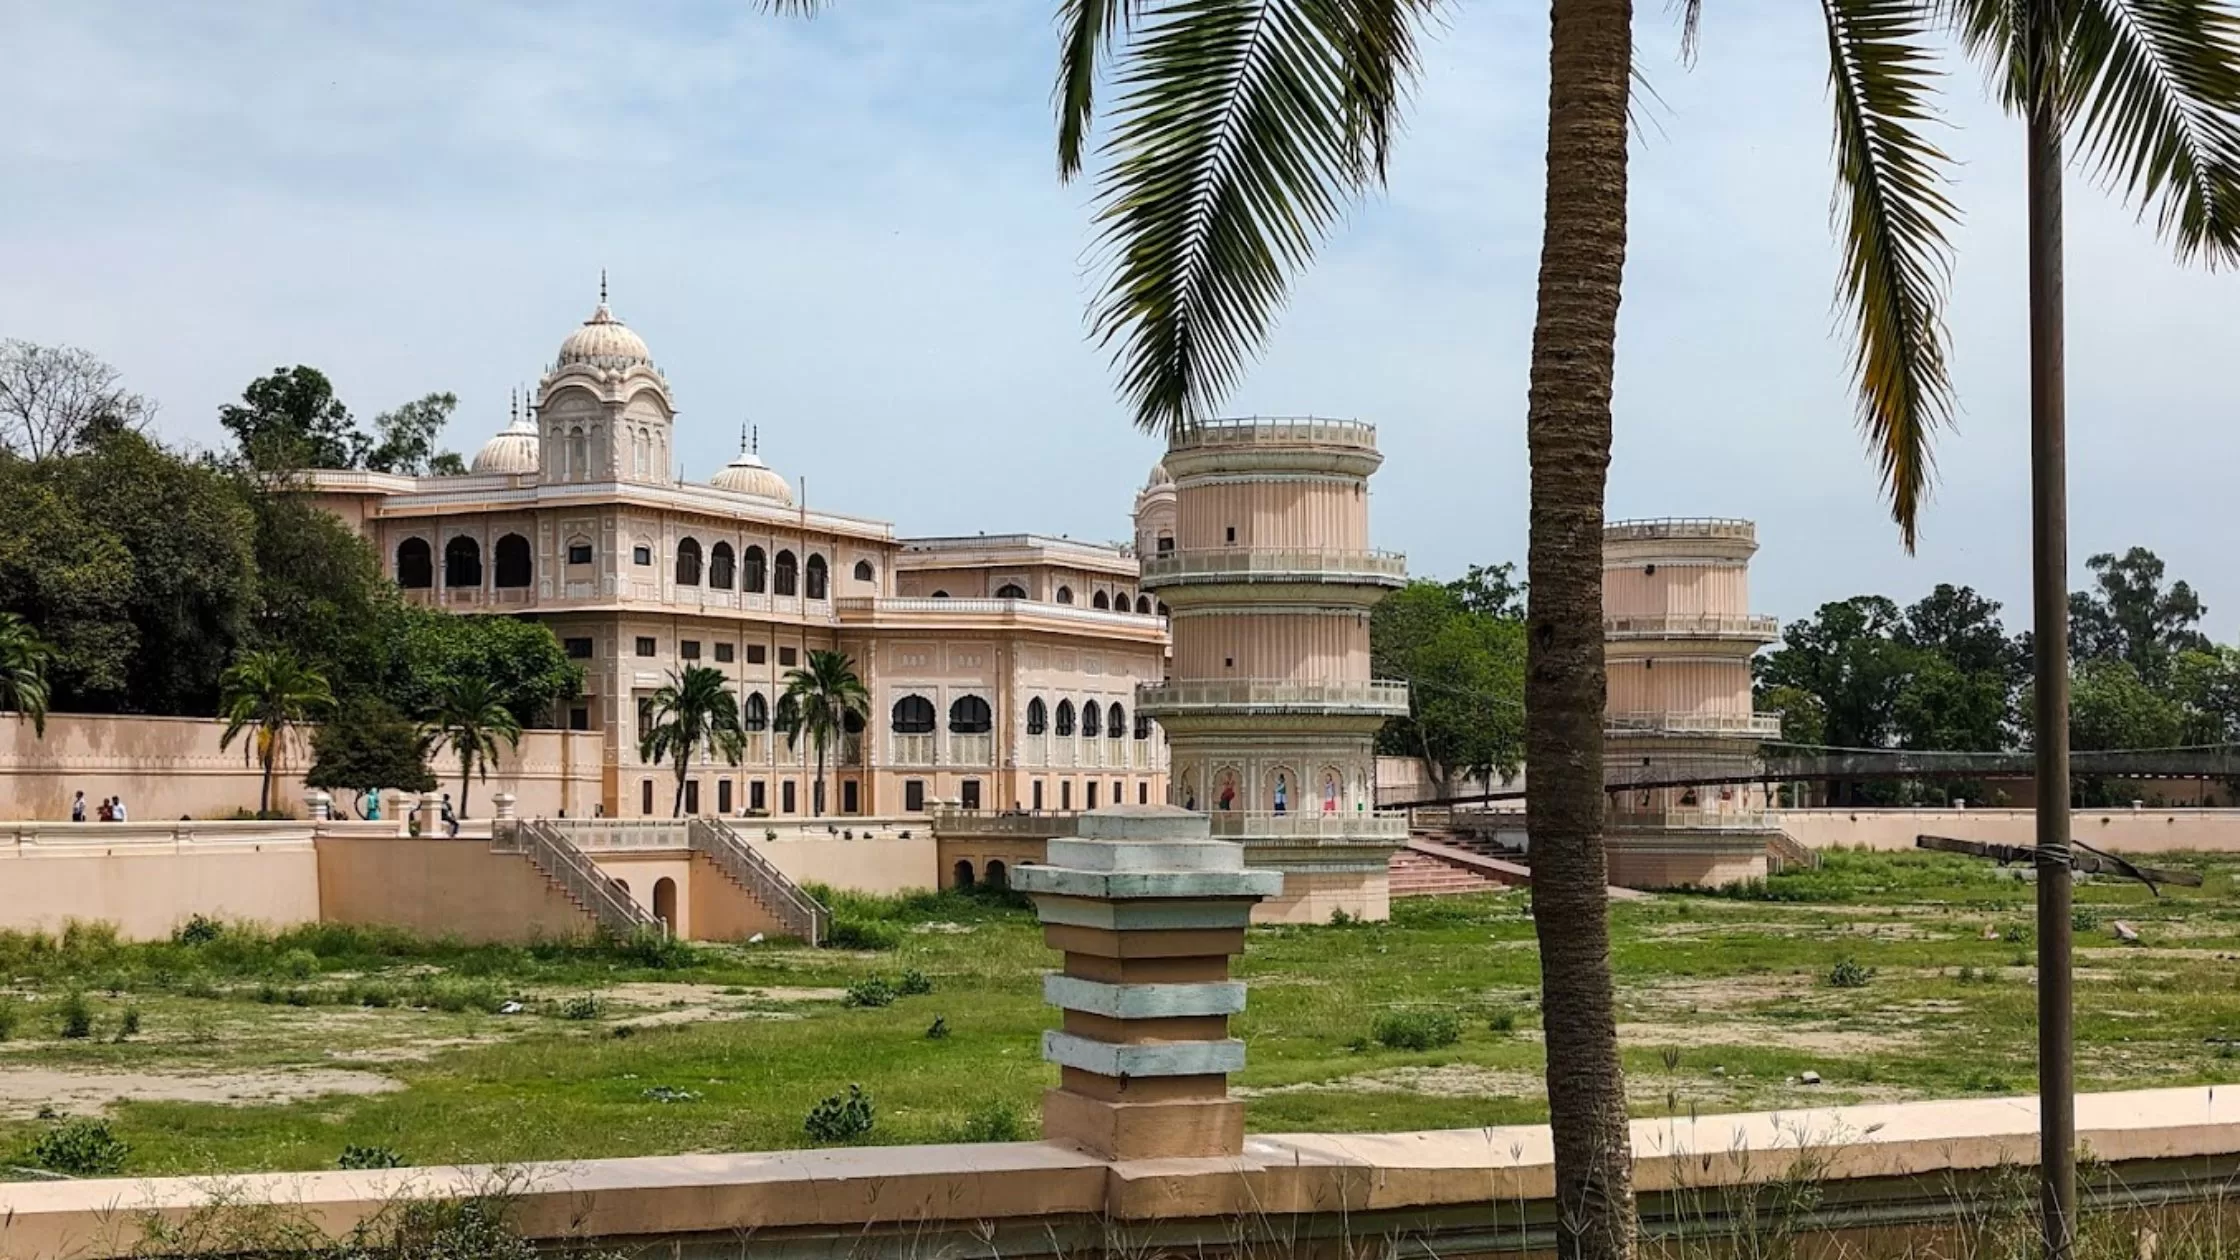 Outside View of one of the Museums in Punjab, Sheesh Mahal Patiala.